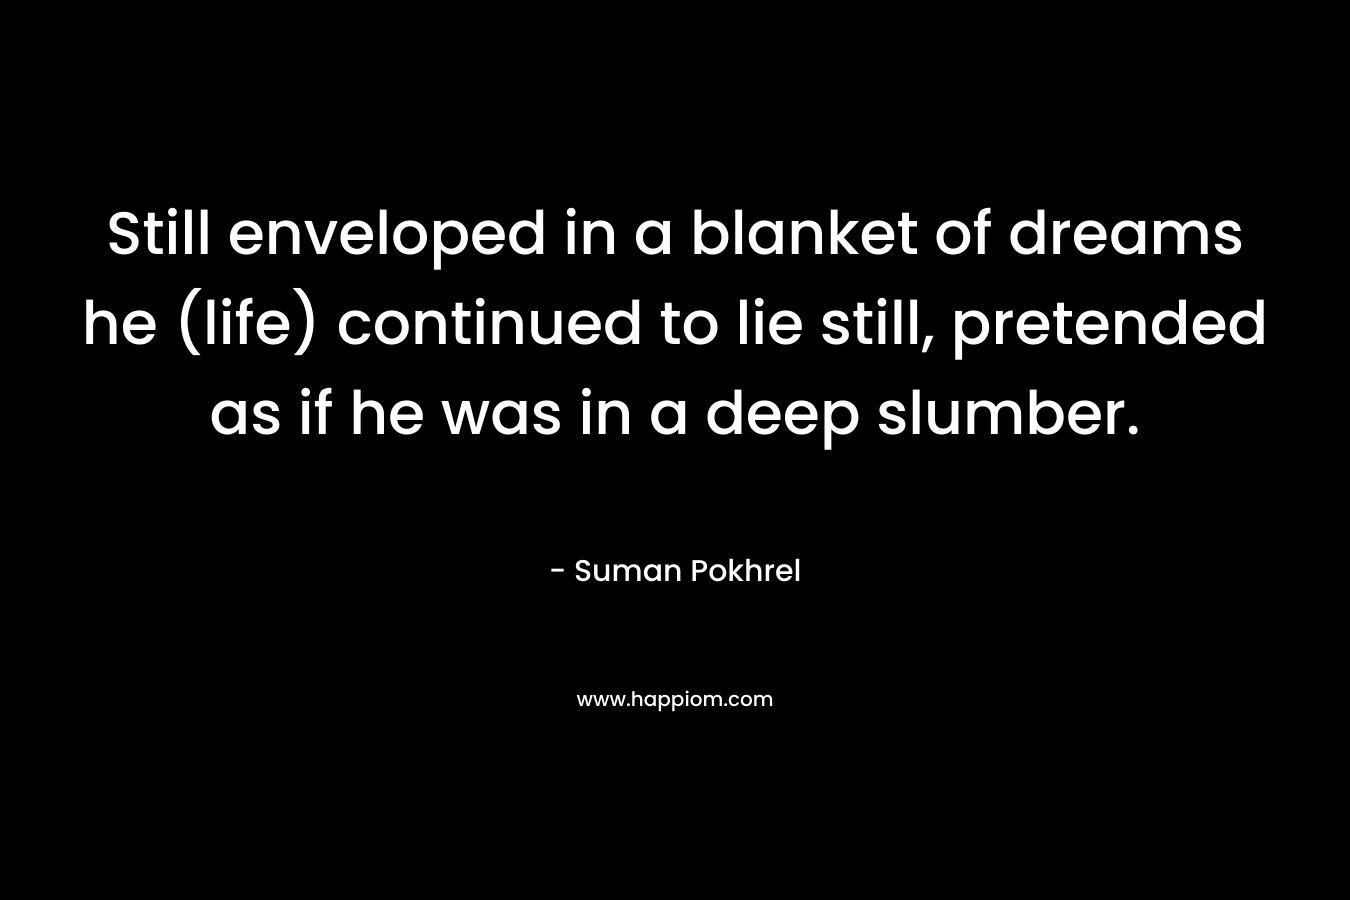 Still enveloped in a blanket of dreams he (life) continued to lie still, pretended as if he was in a deep slumber. – Suman Pokhrel